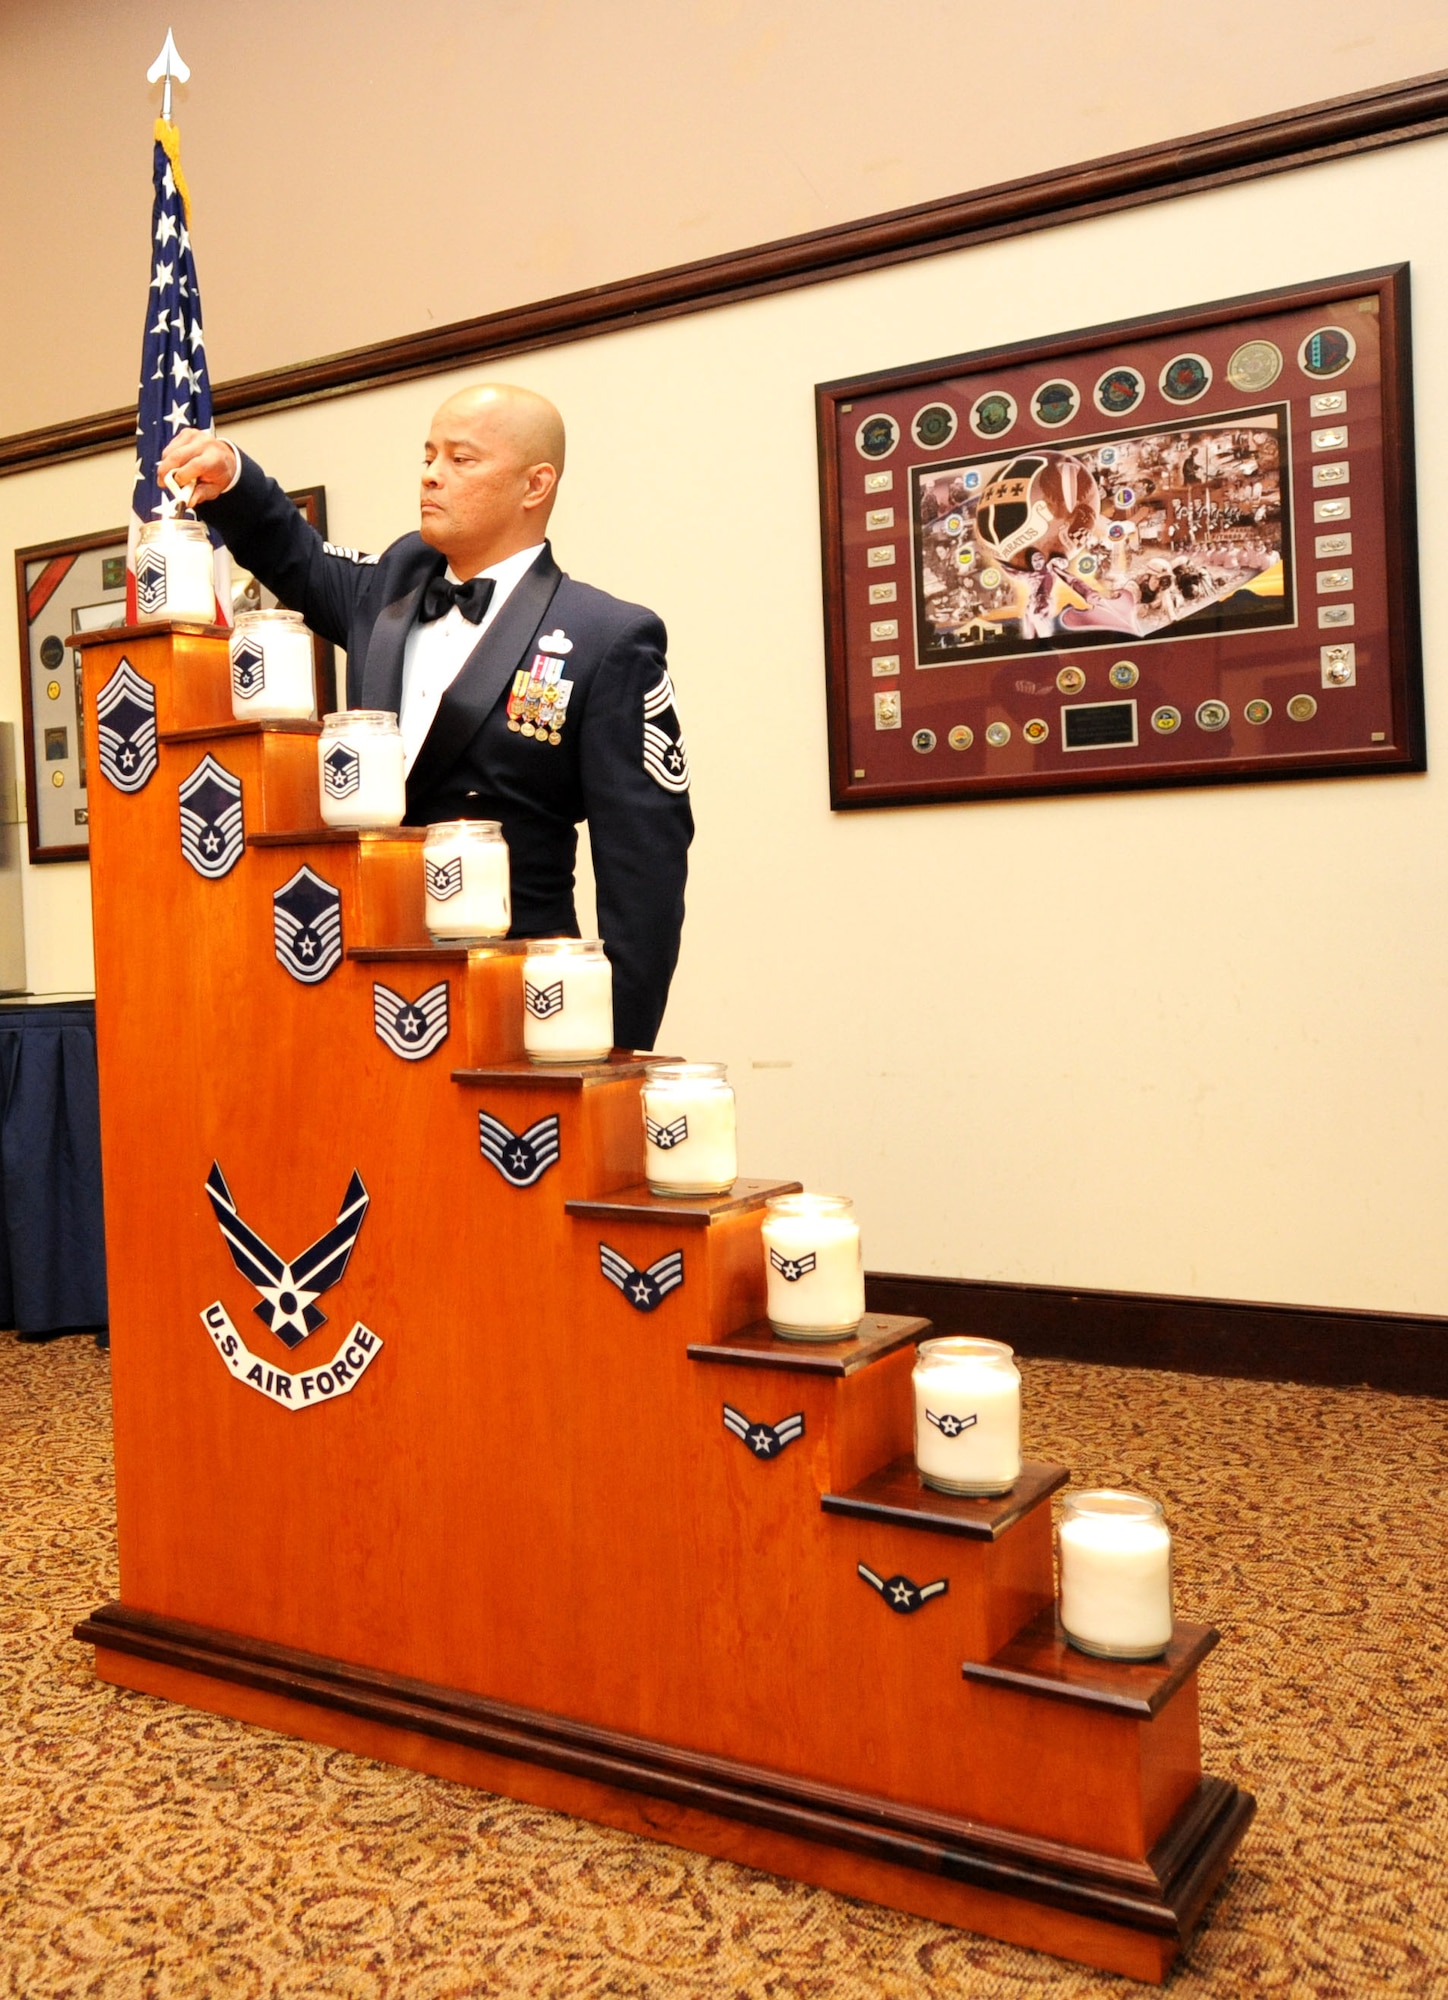 Chief Master Sgt. Glenn Taijeron, 9th Communications Squadron chief enlisted manager, lights the candle representing the rank of chief master sergeant during the Chief’s Recognition Ceremony at the Recce Point Club on Beale Air Force Base, Calif., April 8, 2013. The candle lighting represents an Airman’s journey through the enlisted ranks. (U.S. Air Force photo by Airman 1st Class Bobby Cummings/Released)